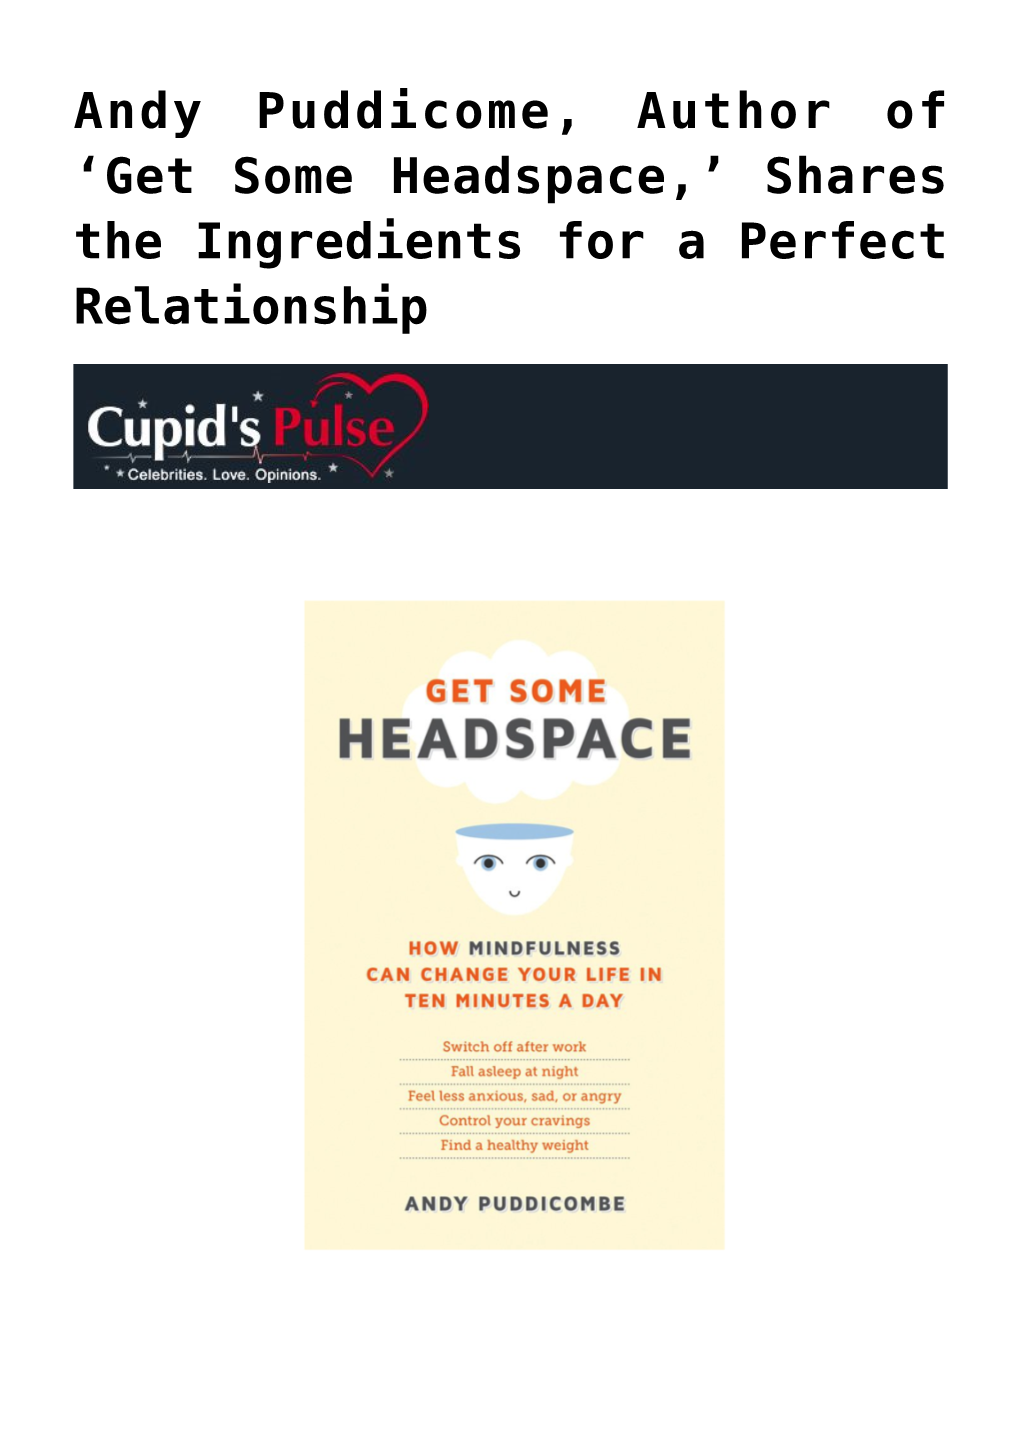 Andy Puddicome, Author of 'Get Some Headspace,' Shares The